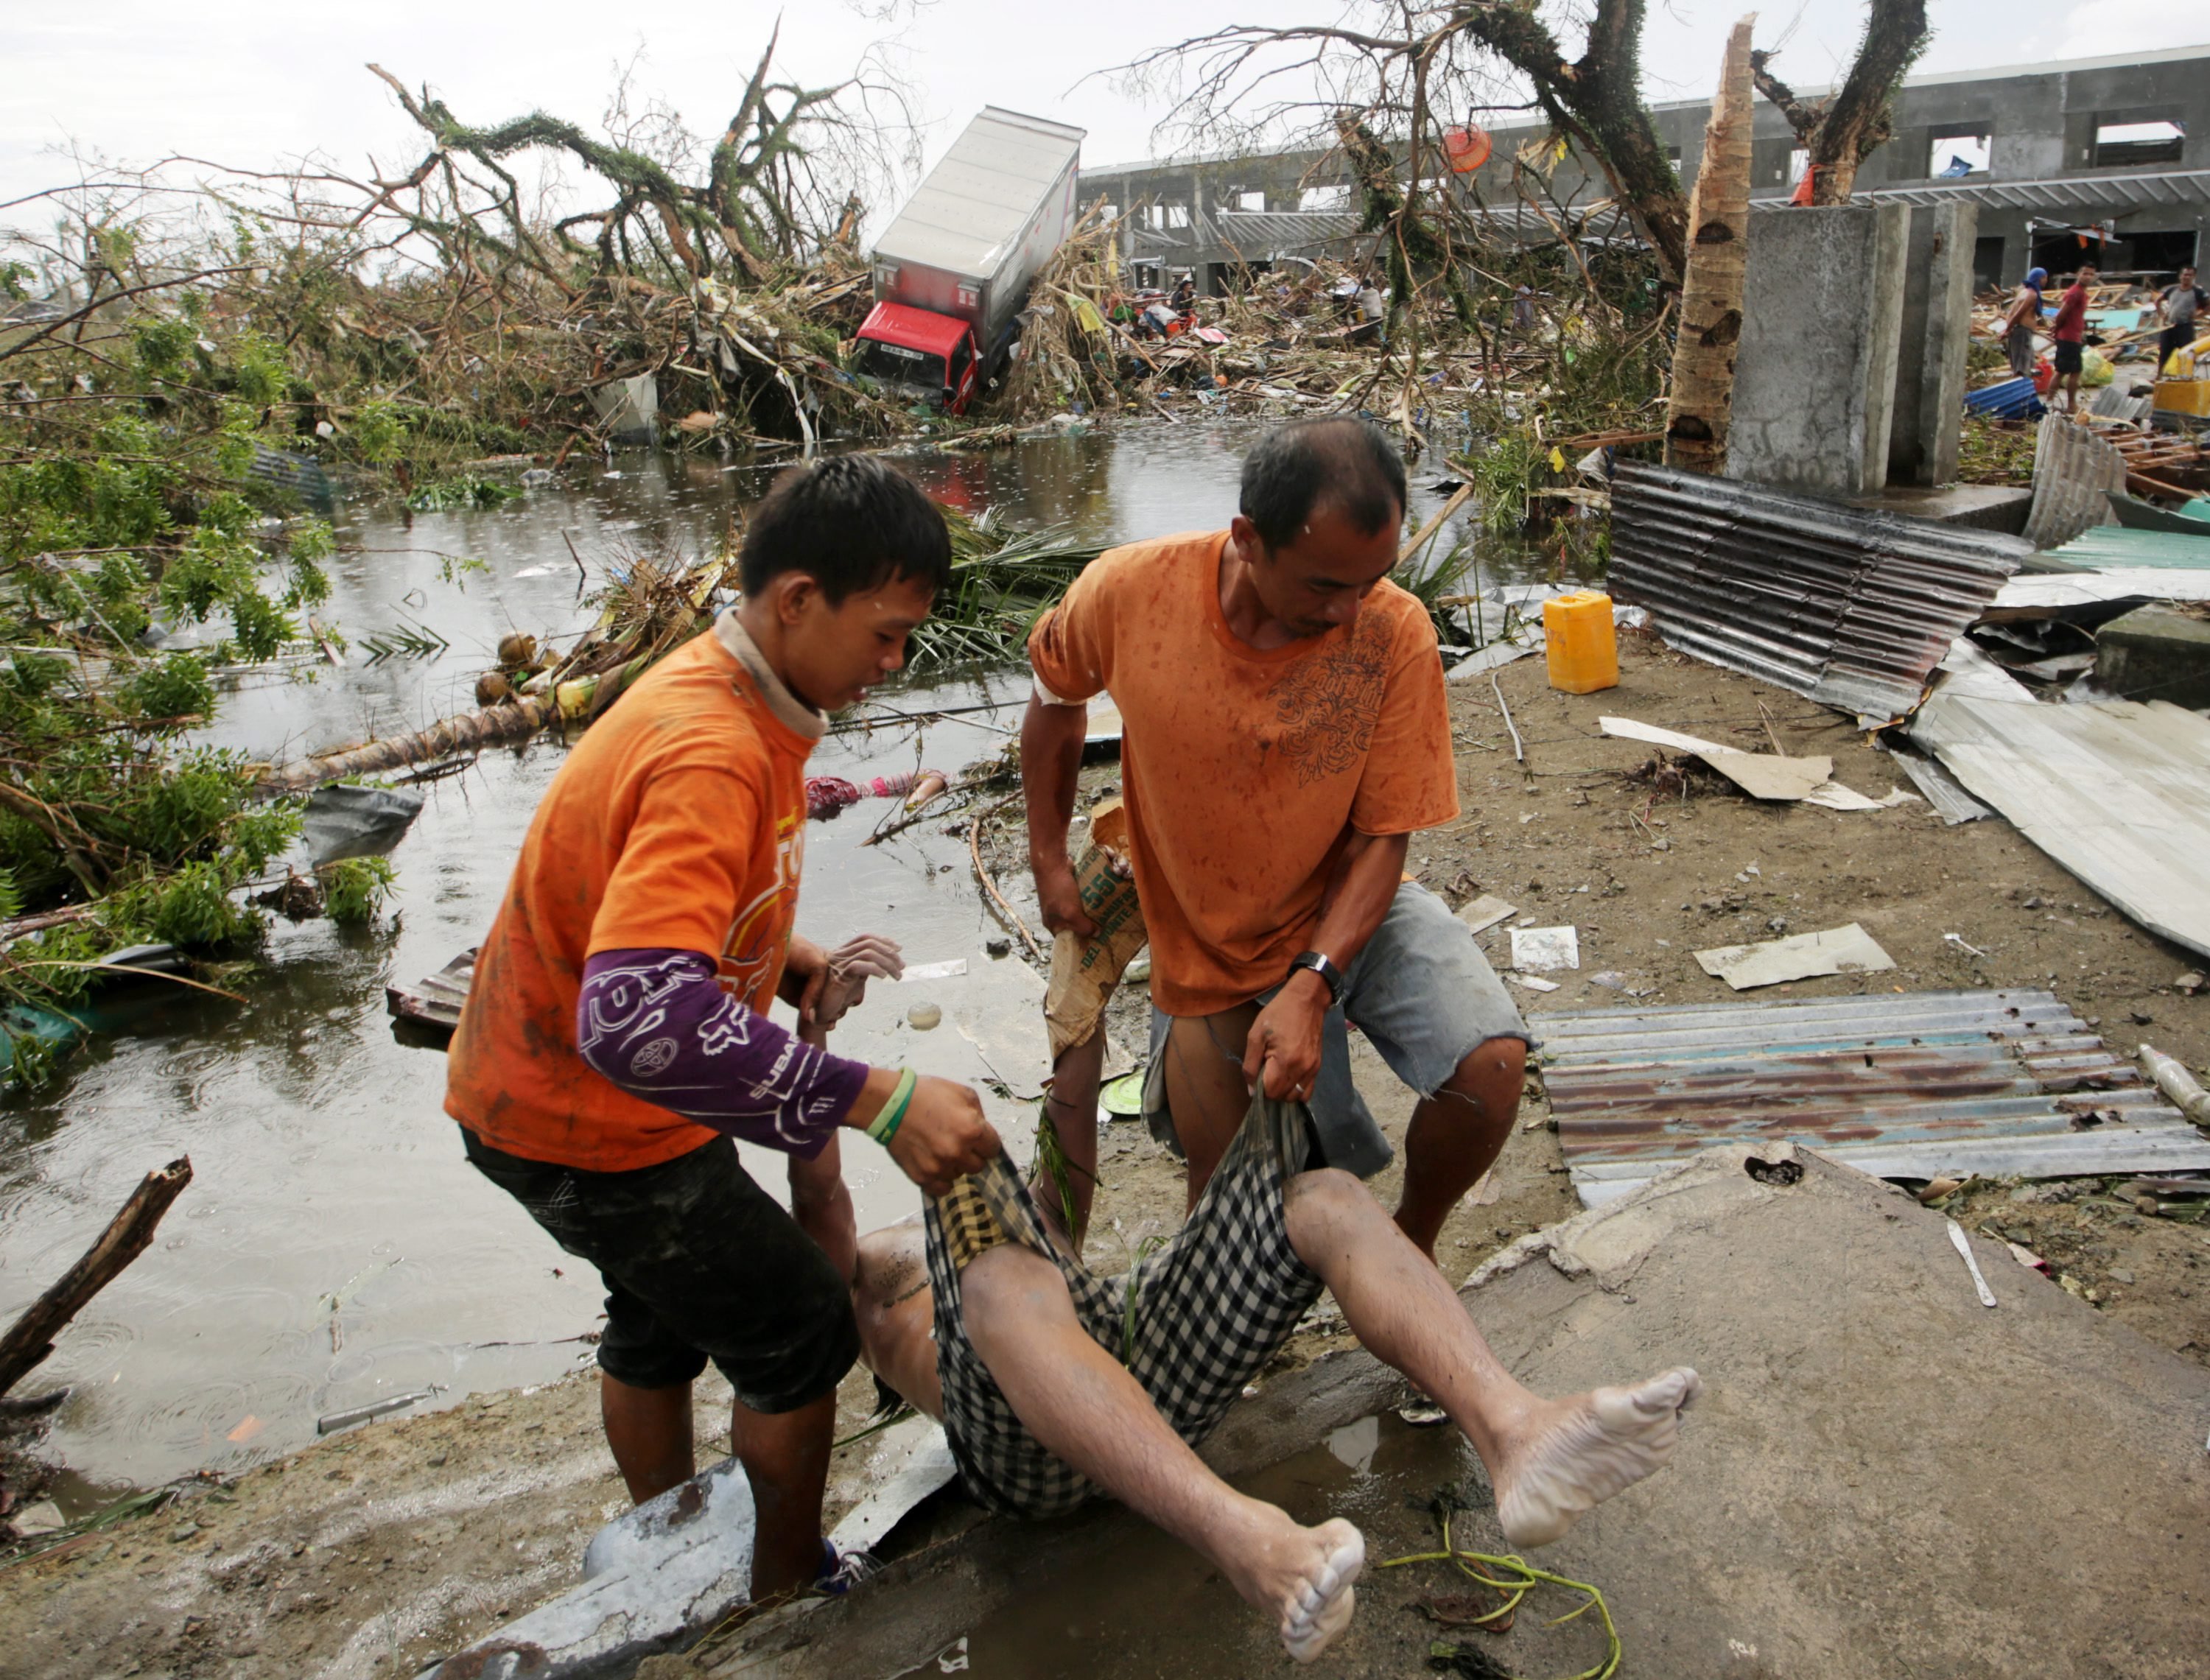 More than 100 died and nearly 800,000 were displaced when Typhoon Haiyan devastated the Philippines last November. Photo: EPA